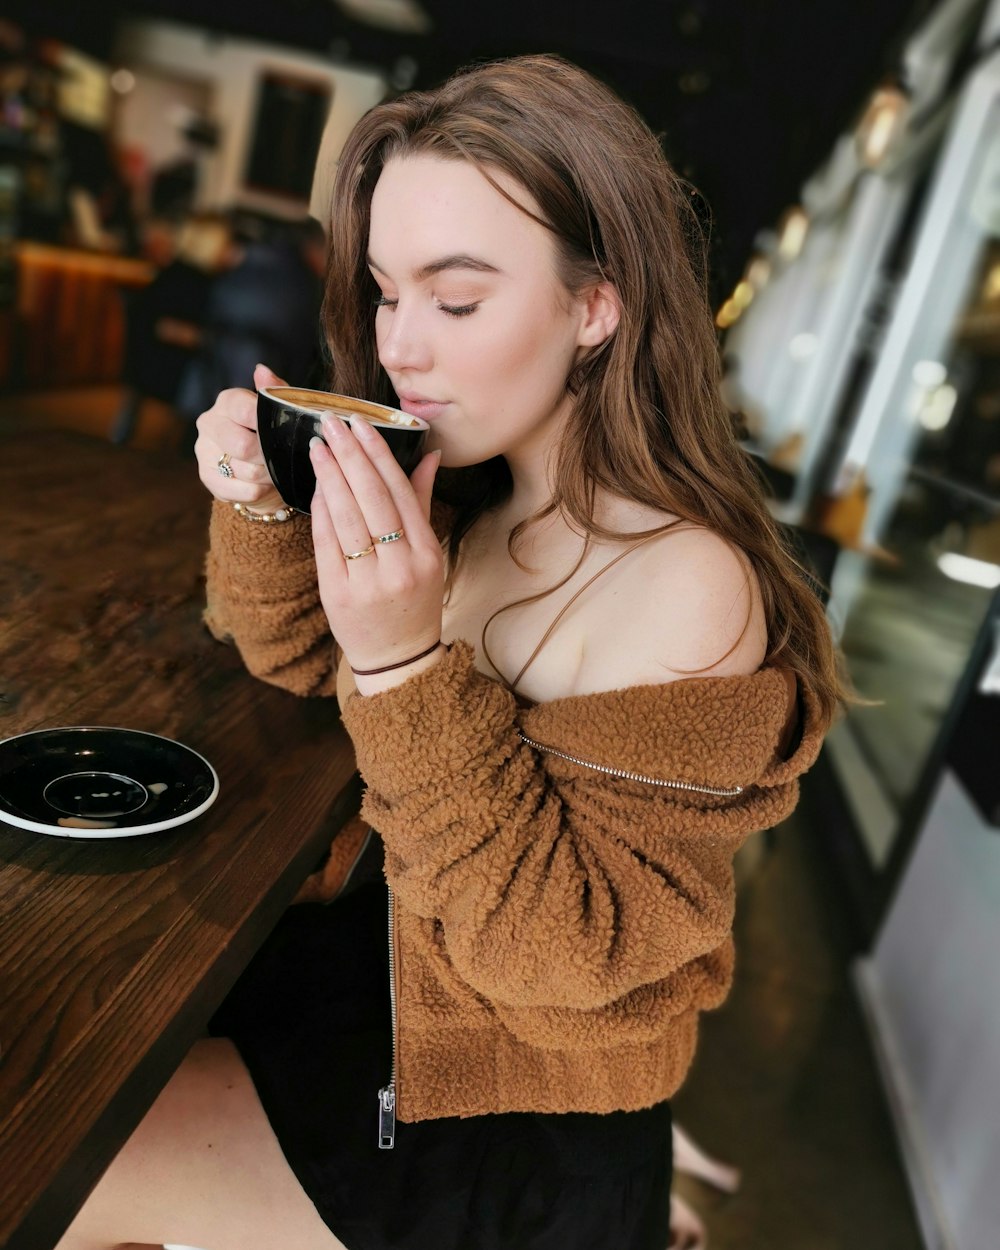 woman sitting on chair while smelling the aroma of coffee in cup